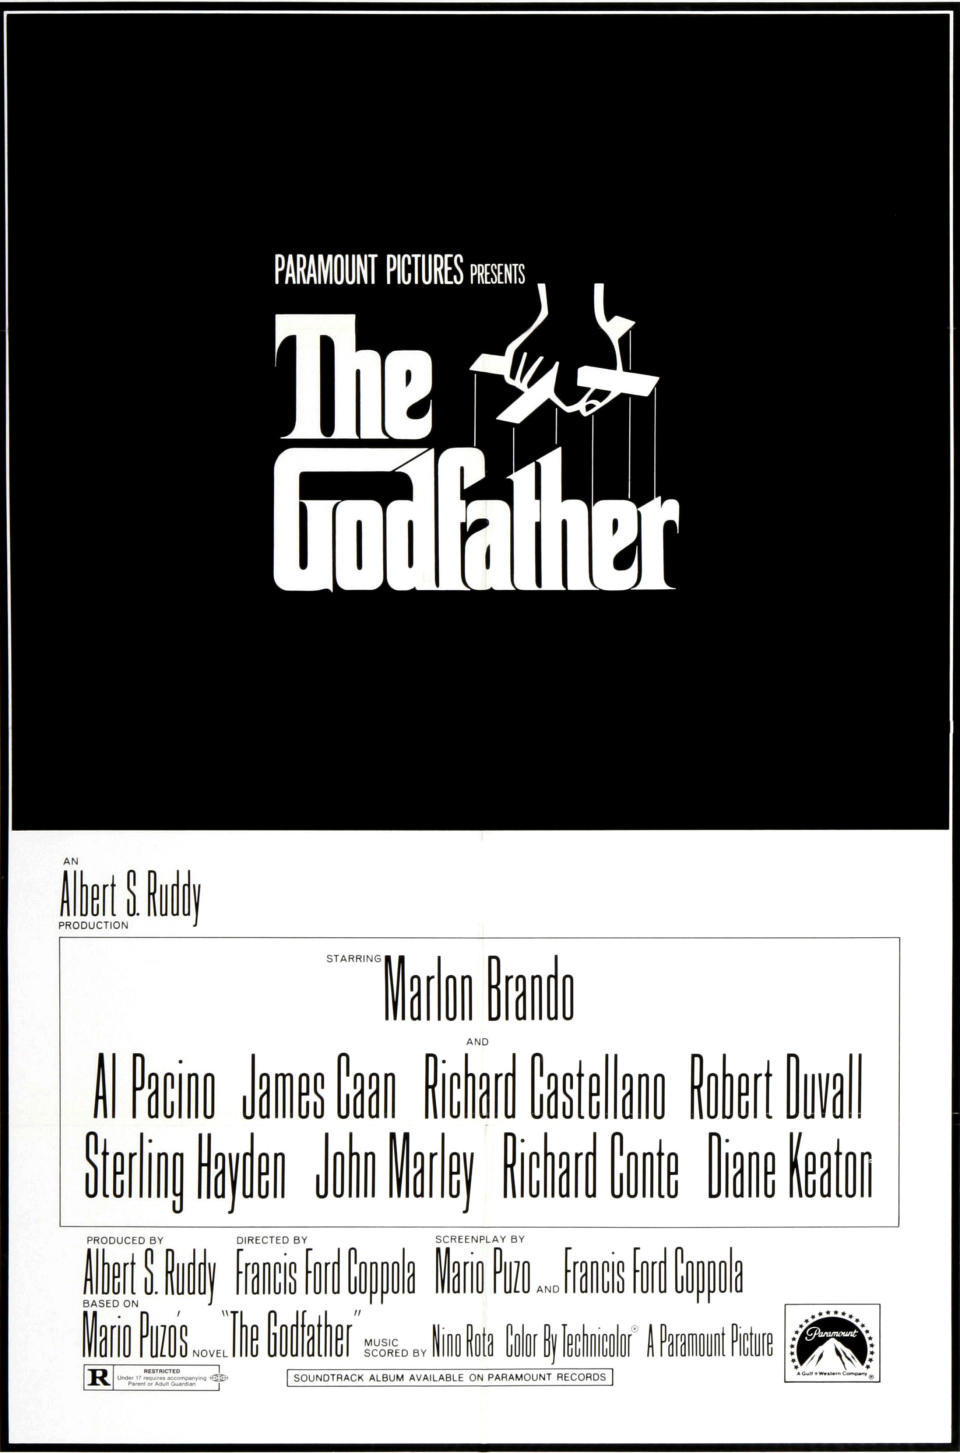 The theatrical poster for "The Godfather"